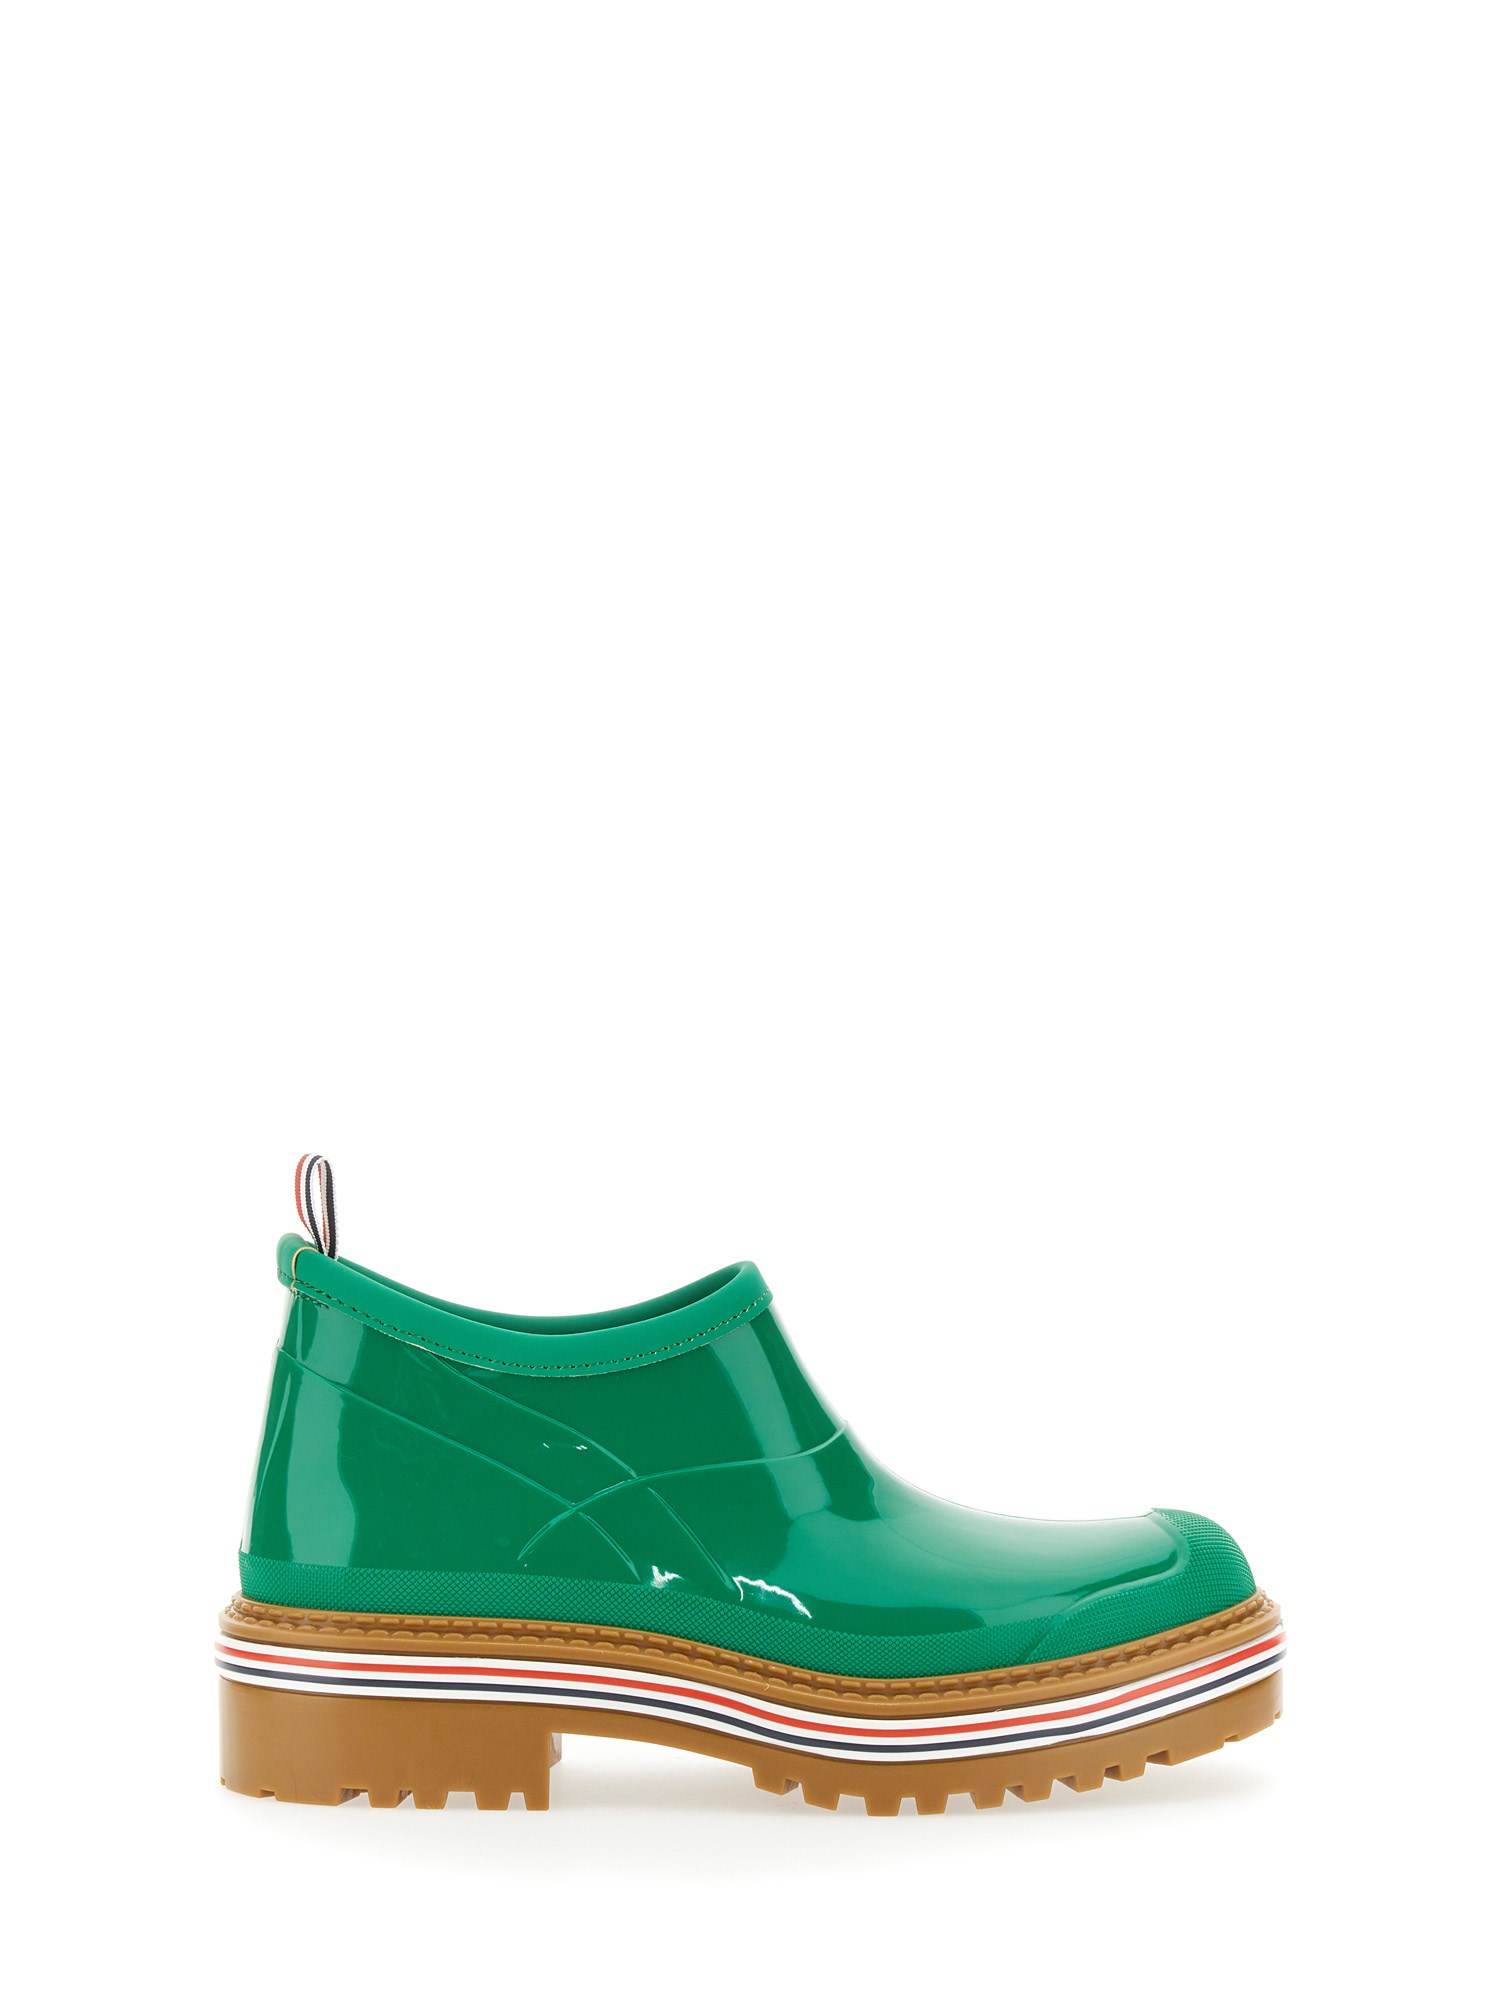 Thom Browne Garden Boots In Green